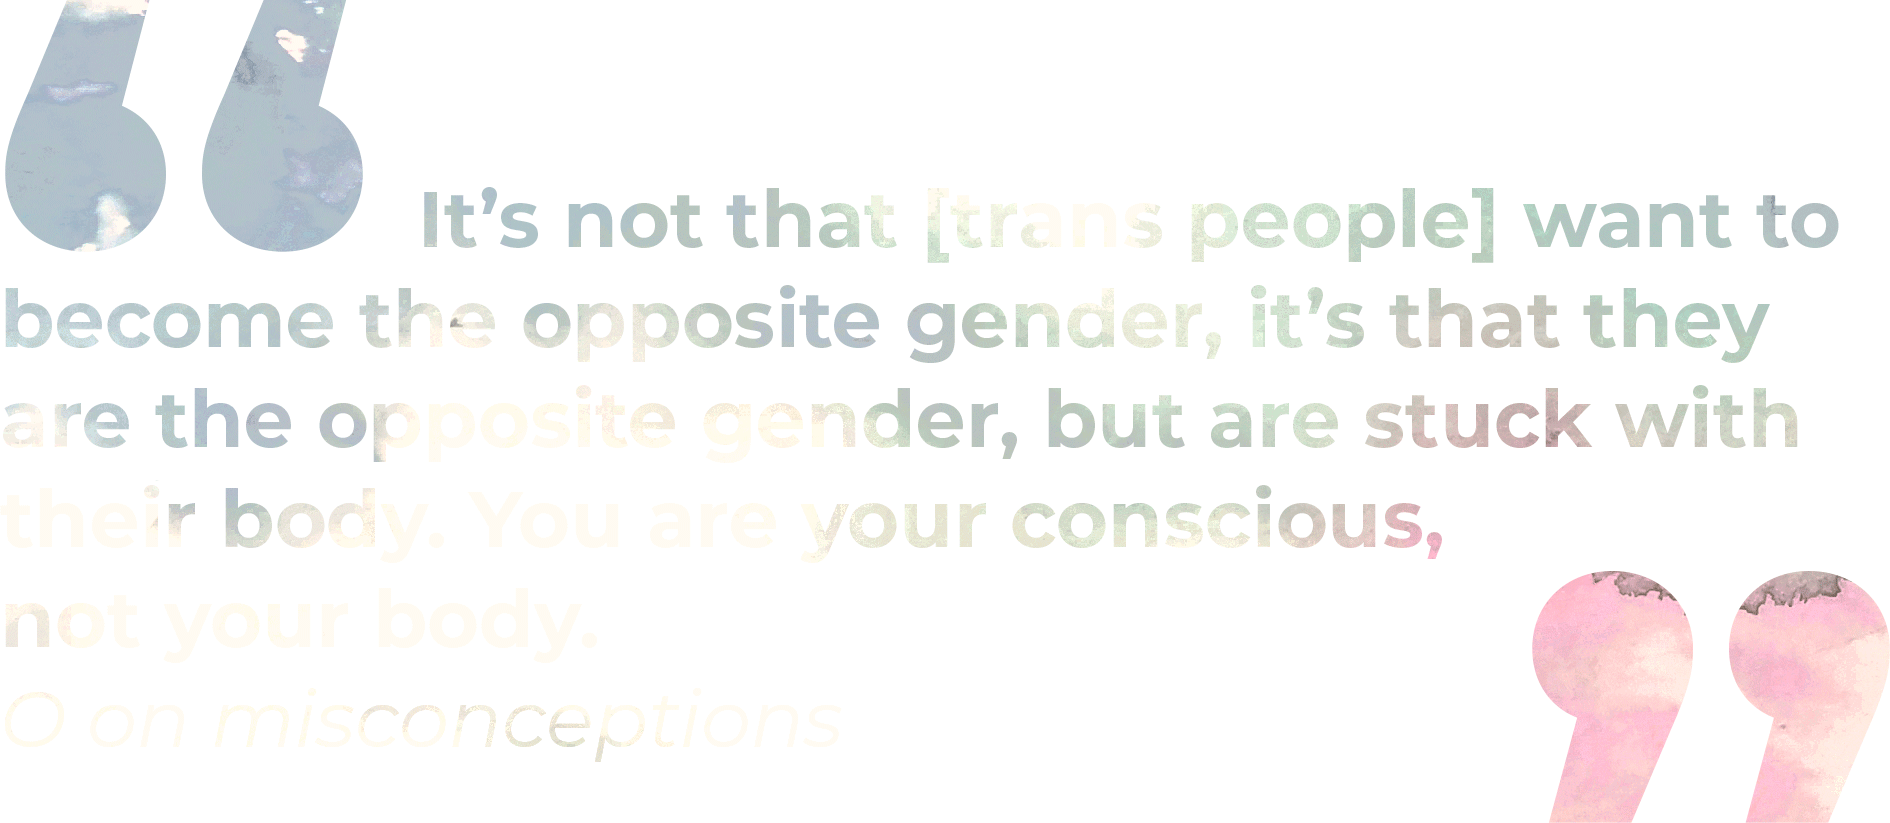 QUOTE: It’s not that [trans people] want to become the opposite gender, it’s that they are the opposite gender, but are stuck with their body. You are your conscious, not your body. - O on misconceptions